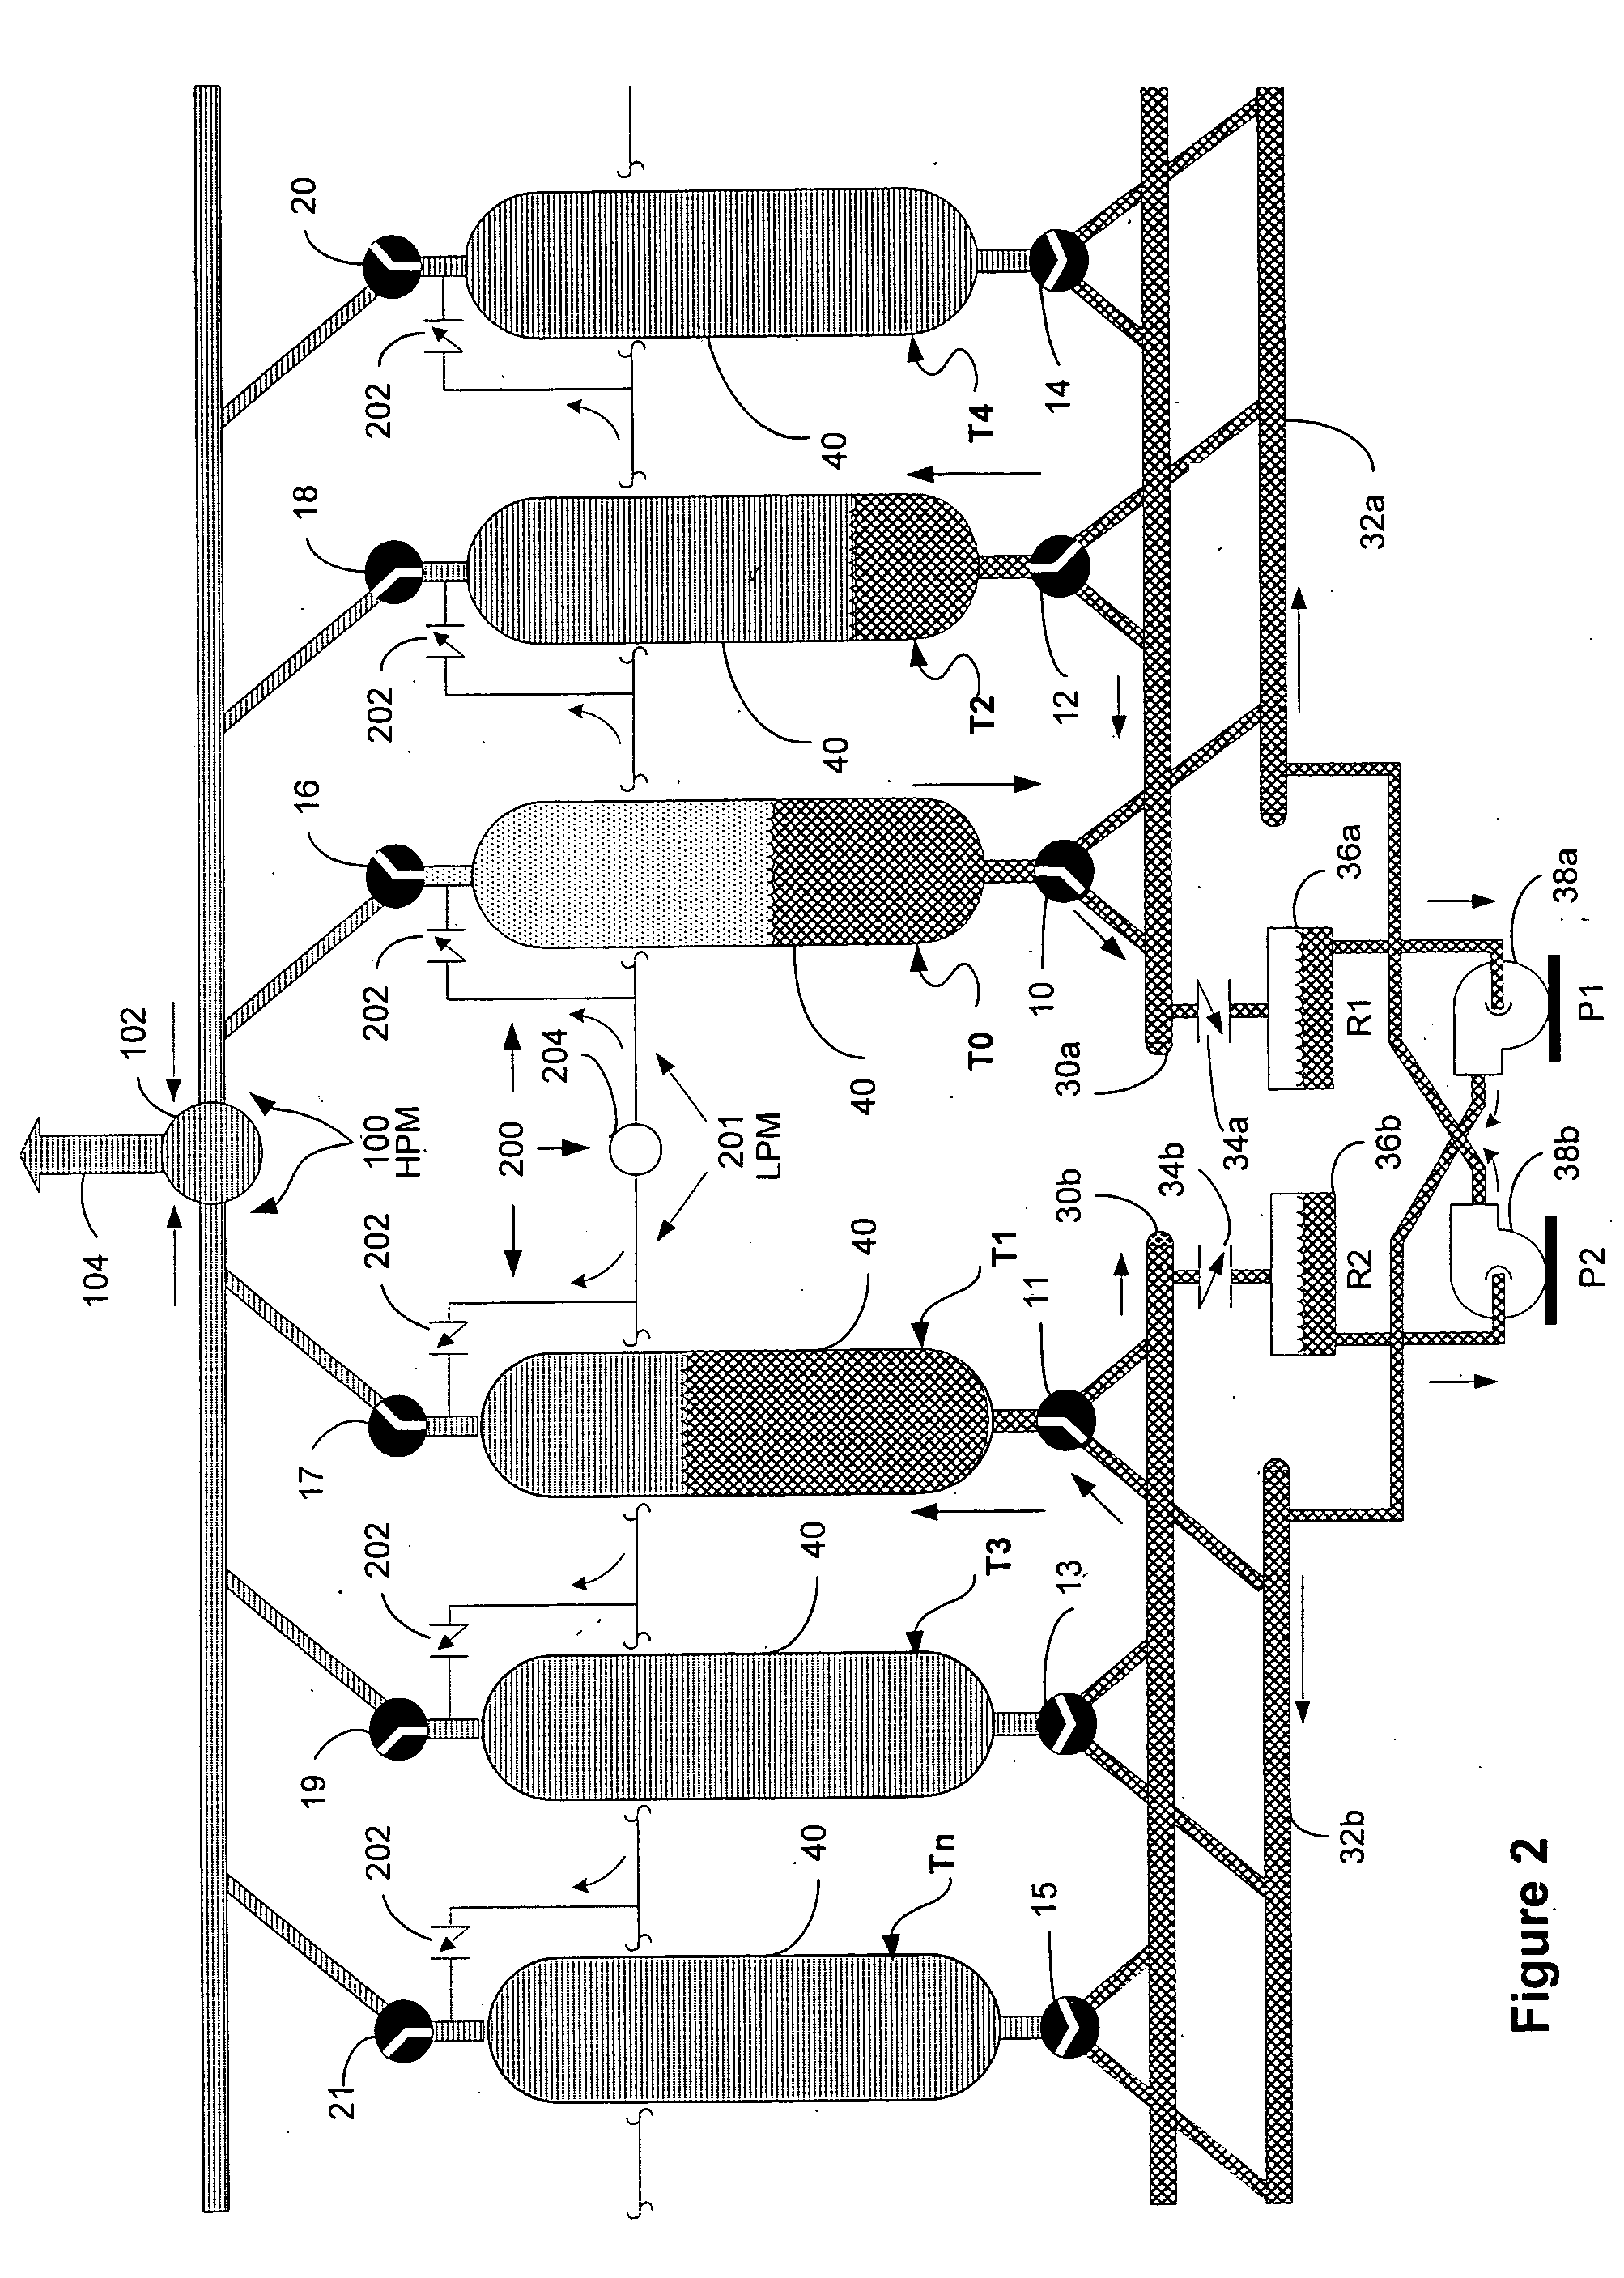 Liquid displacement shuttle system and method